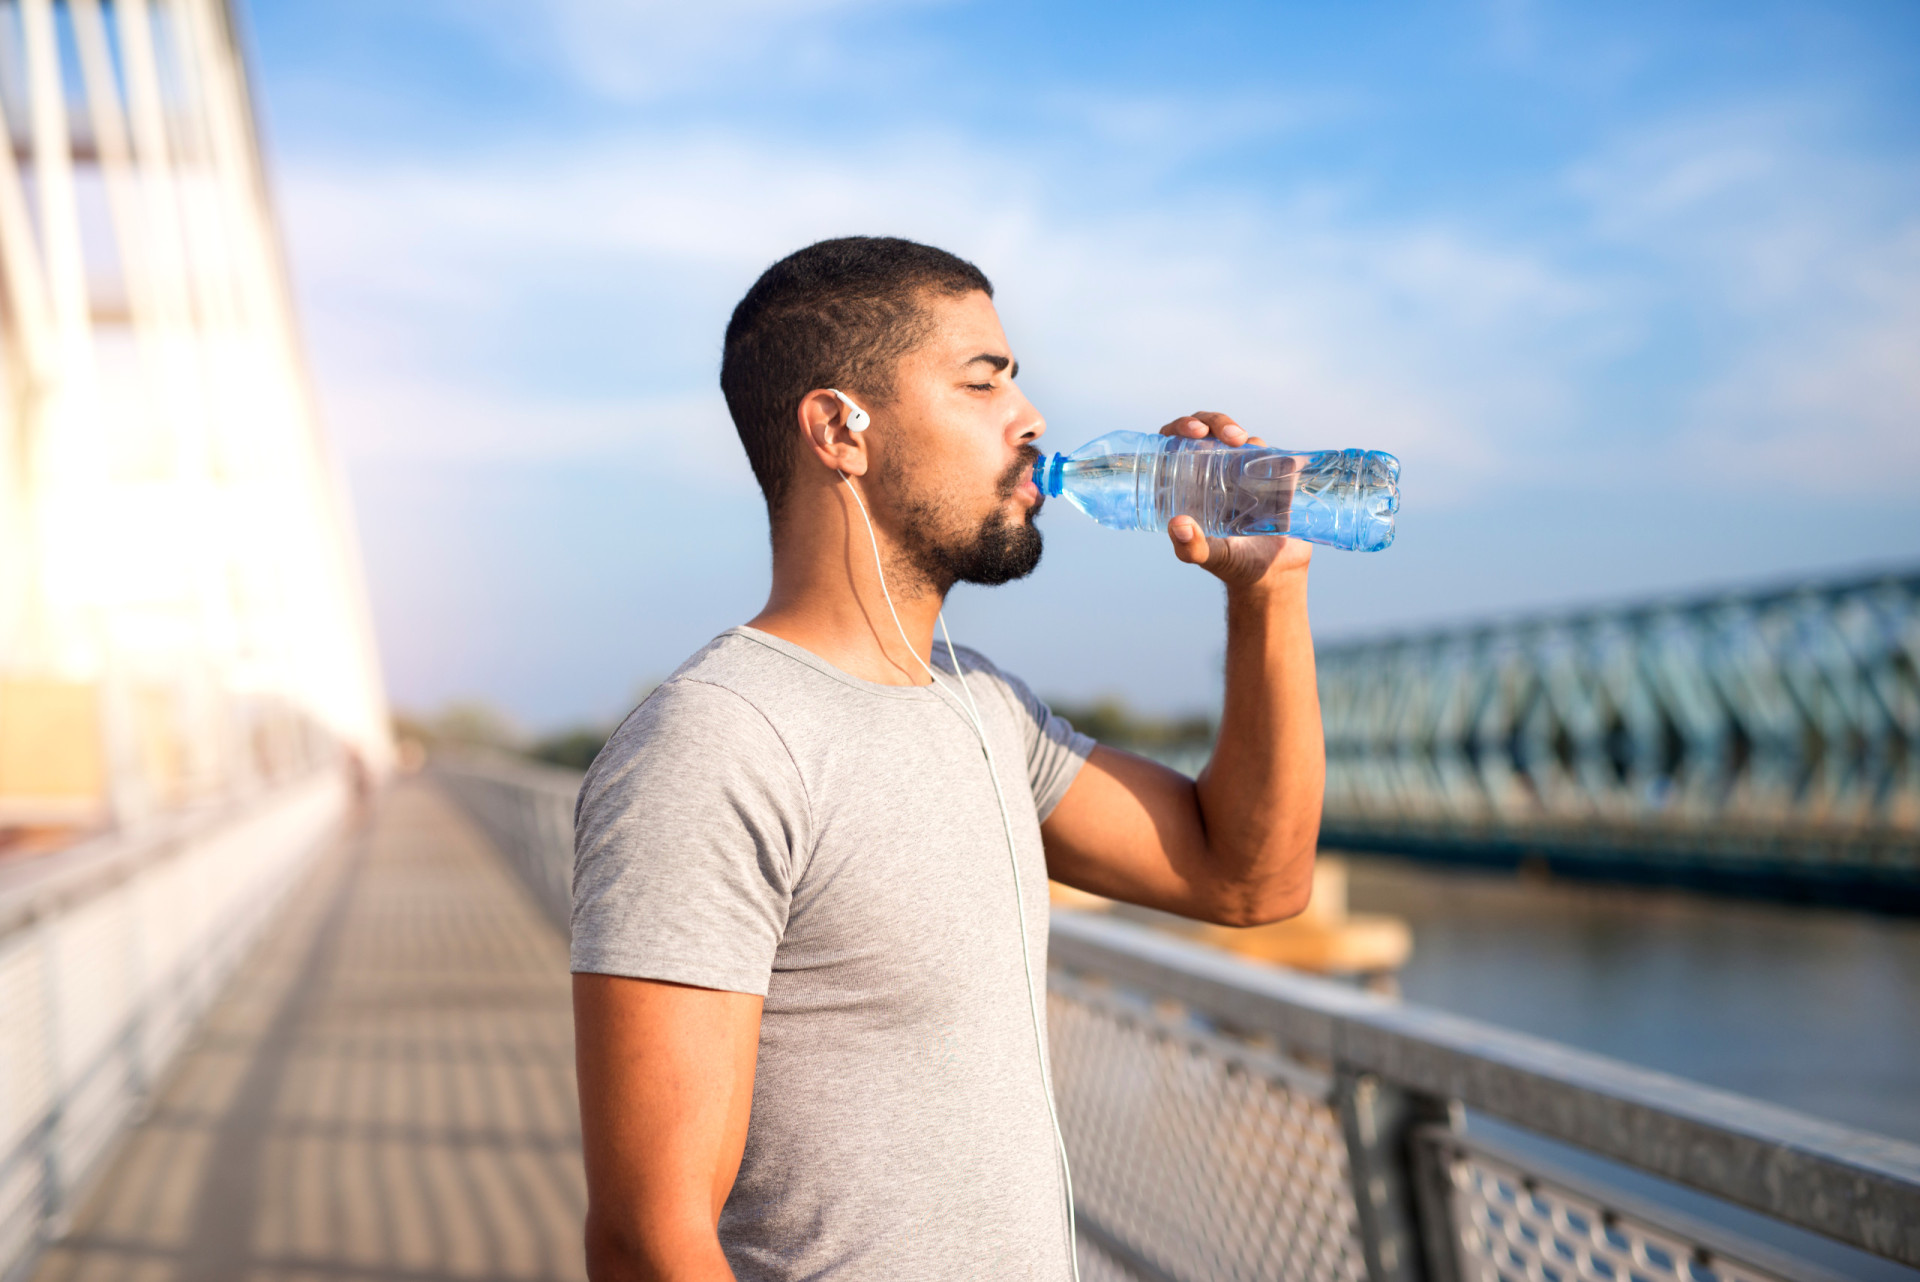 <p>Dehydration is a significant risk factor for DVT, so make sure you're drinking enough water. Keep in mind that alcohol and large quantities of caffeinated beverages can increase dehydration.</p><p><a href="https://www.msn.com/en-us/community/channel/vid-7xx8mnucu55yw63we9va2gwr7uihbxwc68fxqp25x6tg4ftibpra?cvid=94631541bc0f4f89bfd59158d696ad7e">Follow us and access great exclusive content every day</a></p>